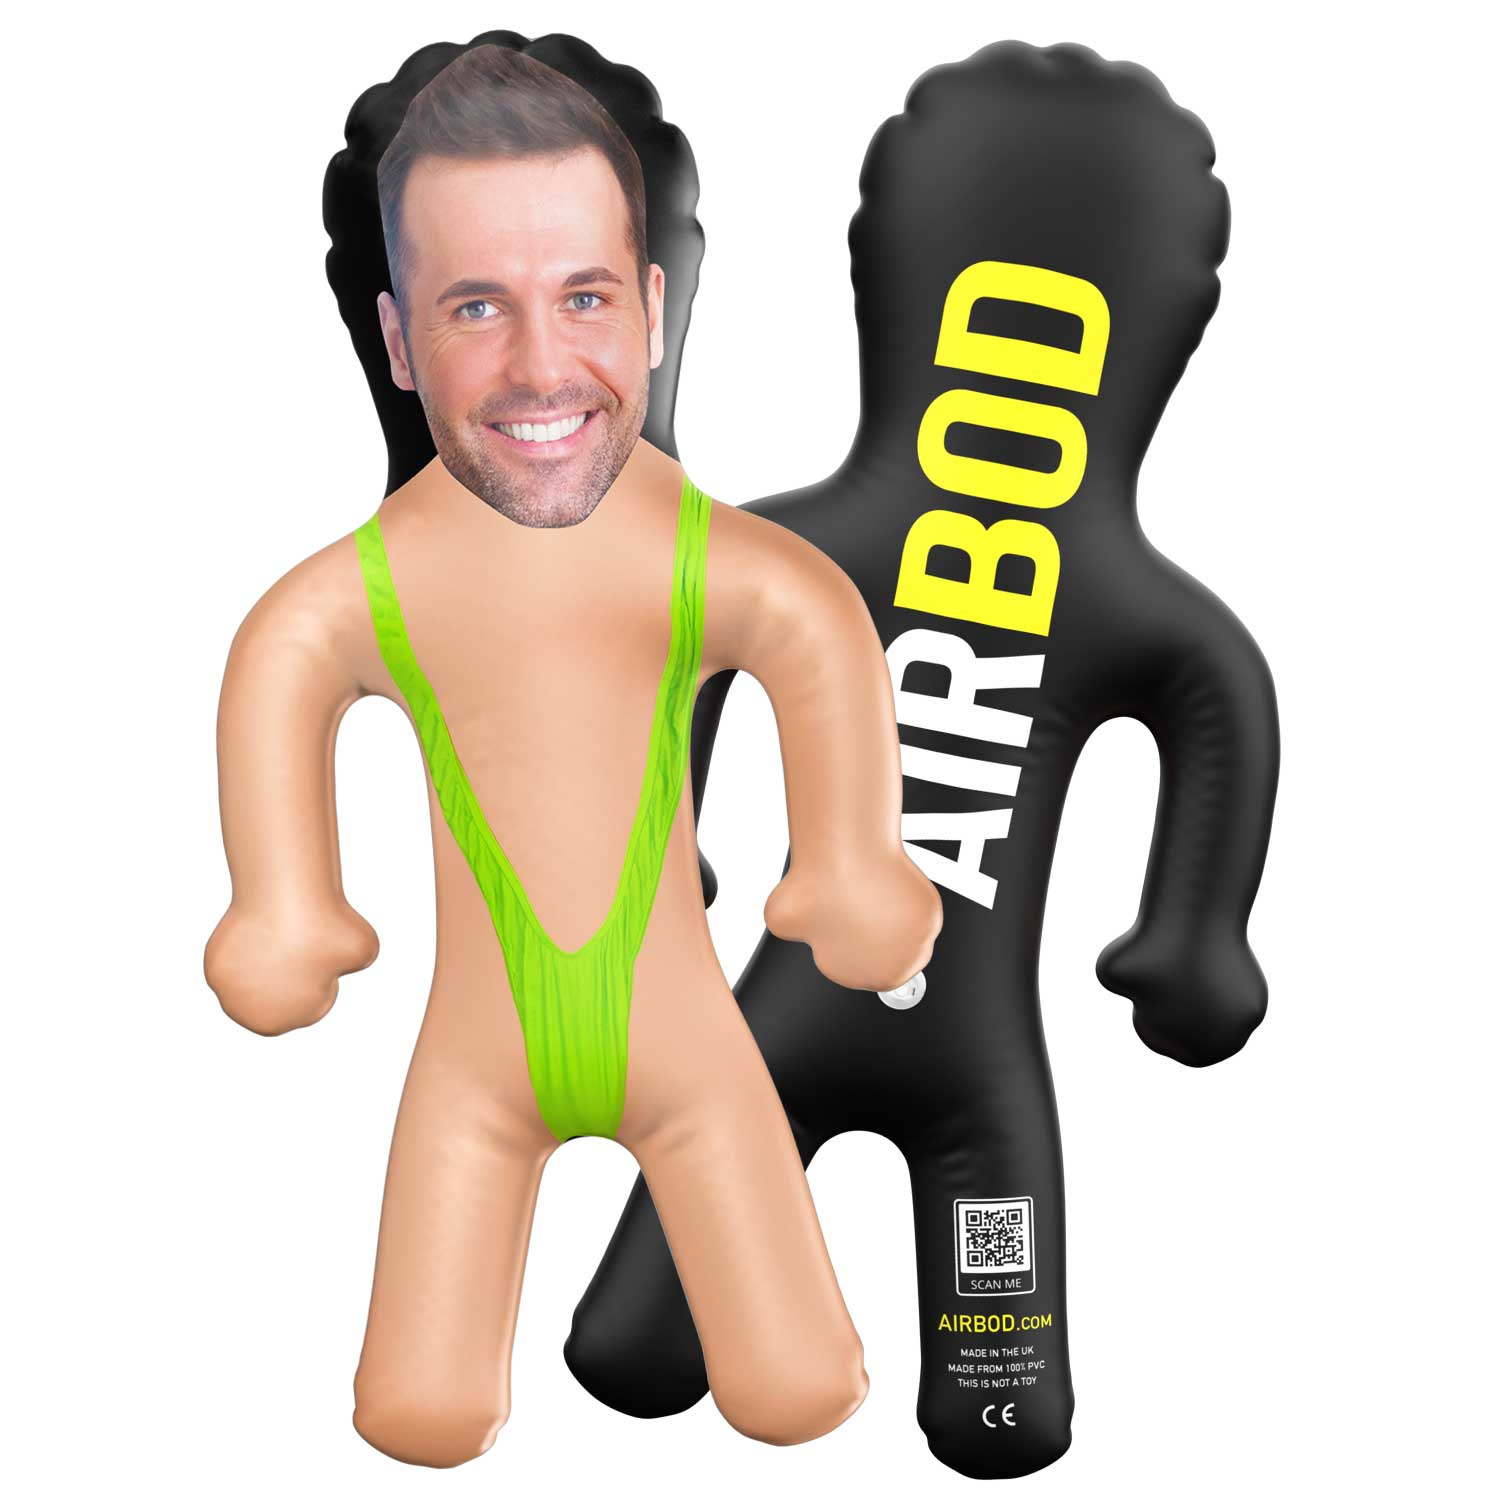 The Mankini Blow Up Doll